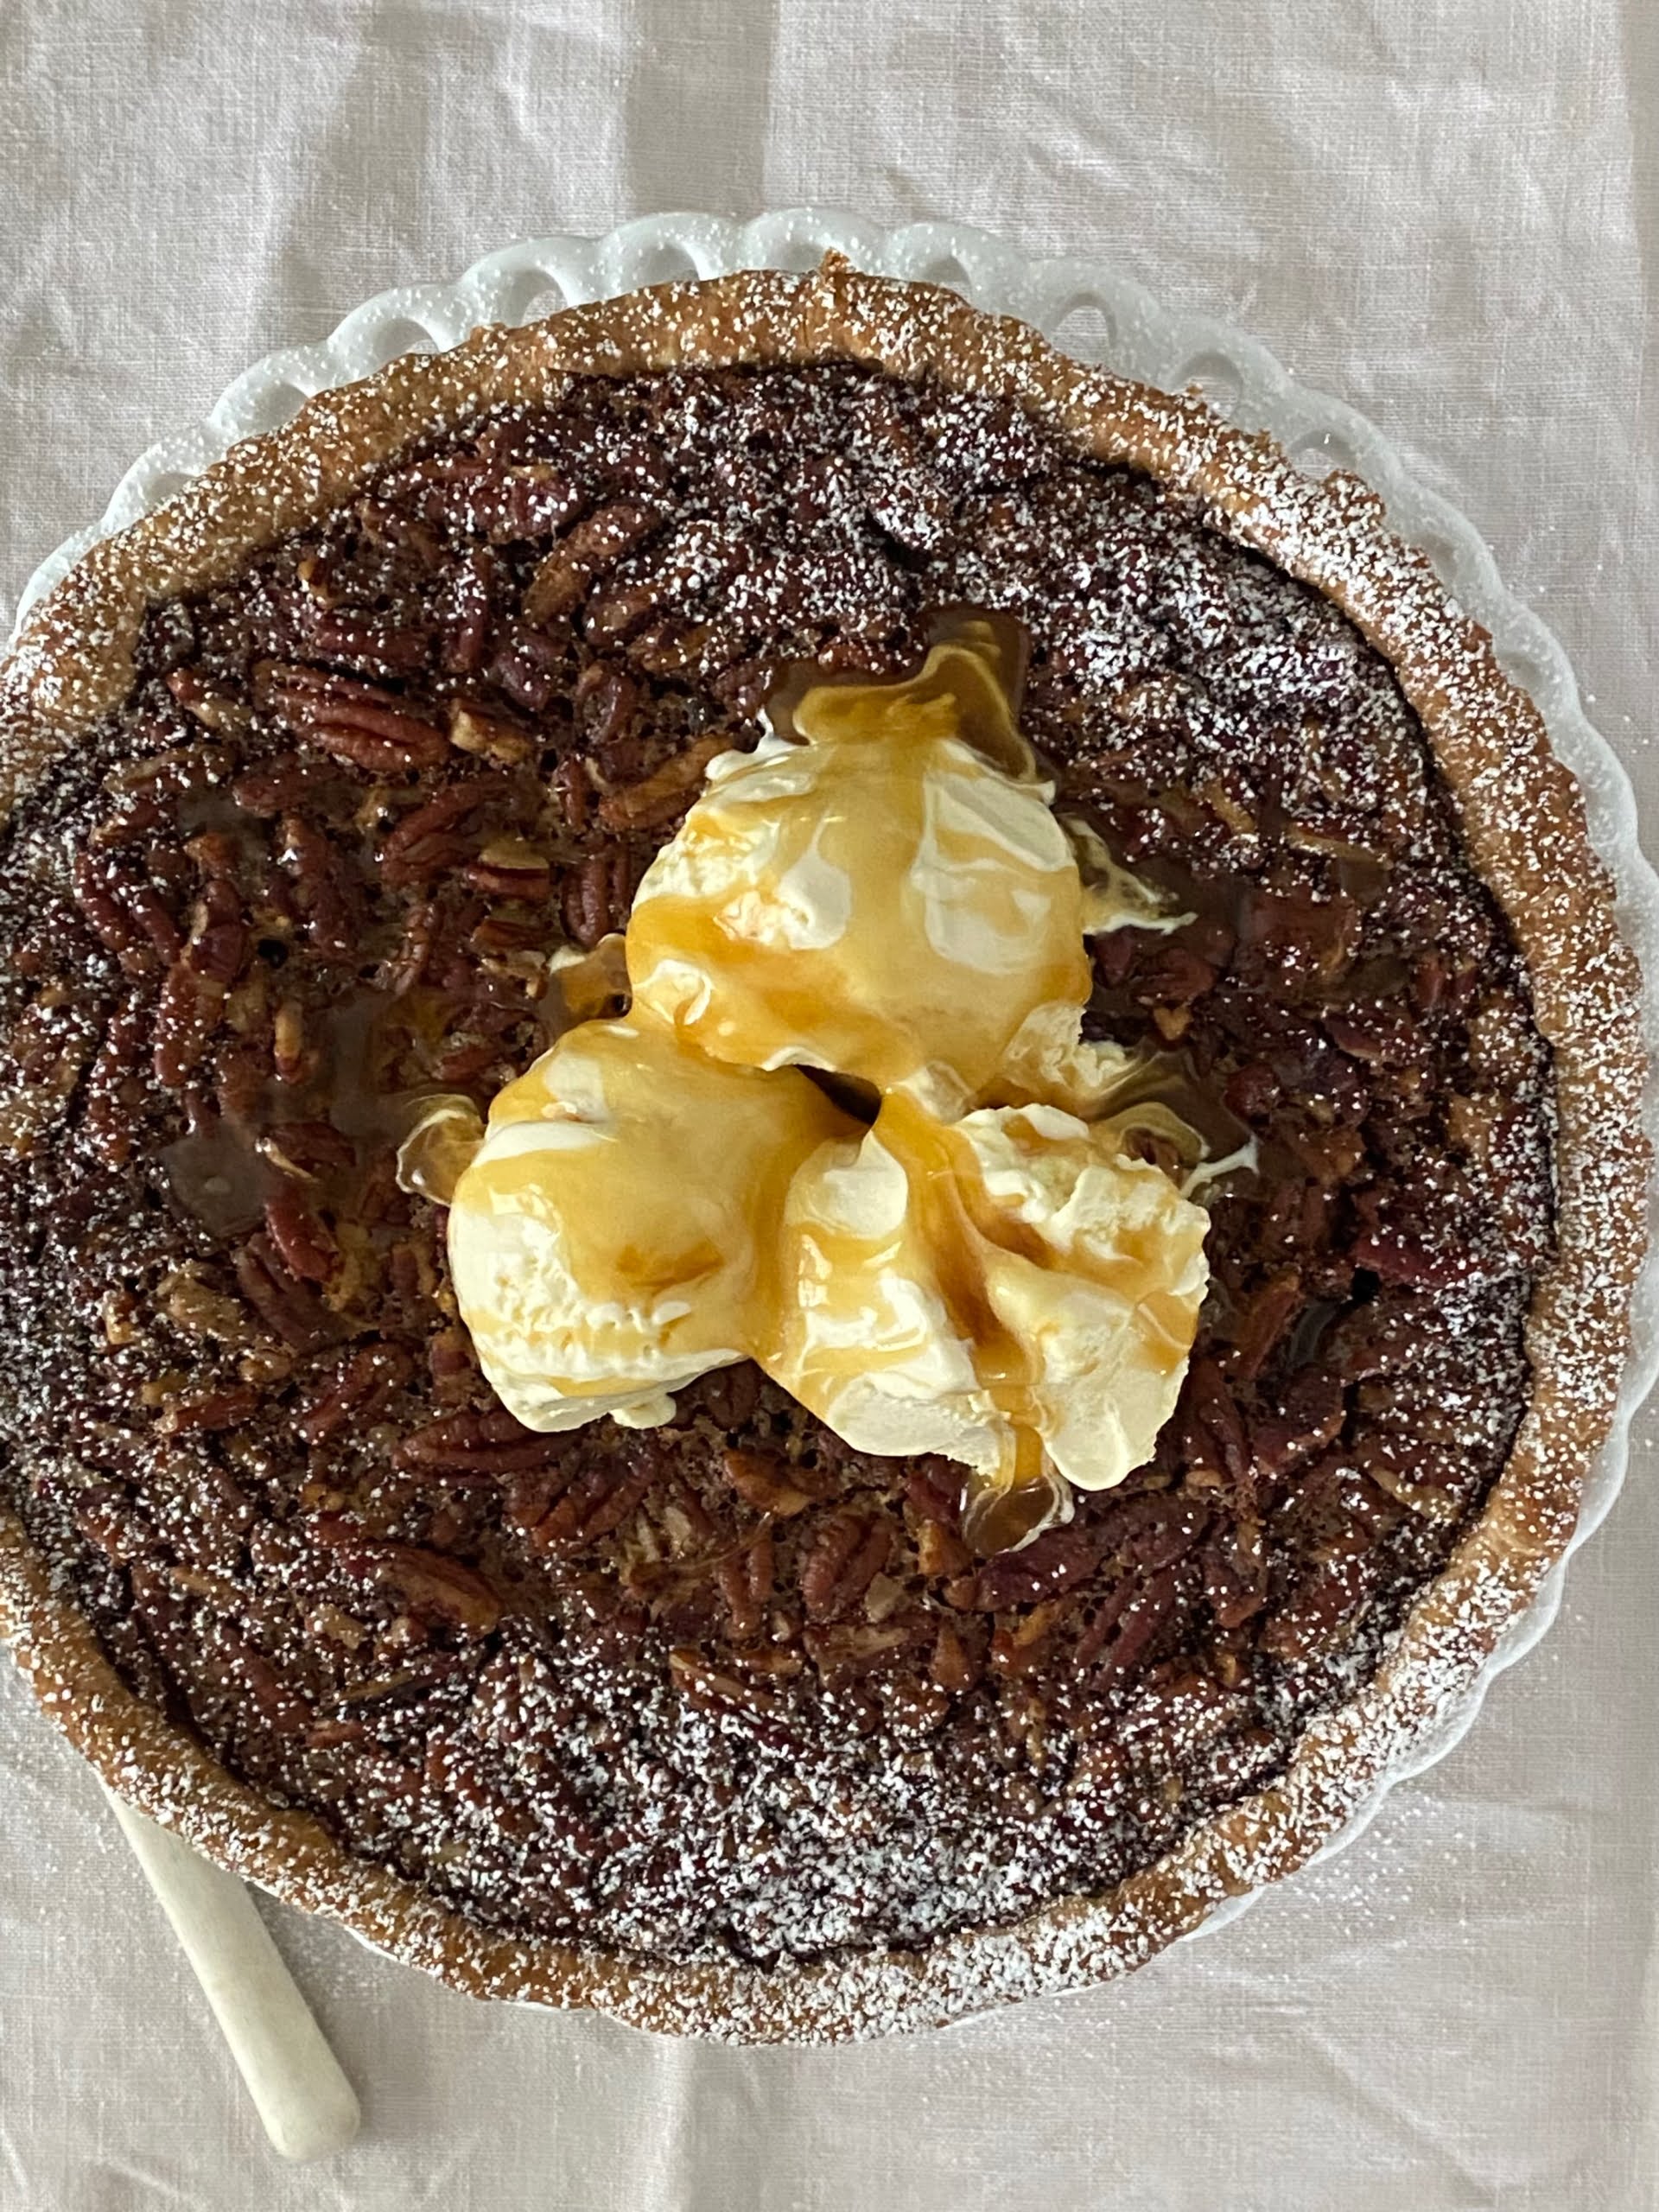 Maple Pecan Pie topped with vanilla ice cream and drizzled with Salted Maple Caramel - Pure Maple